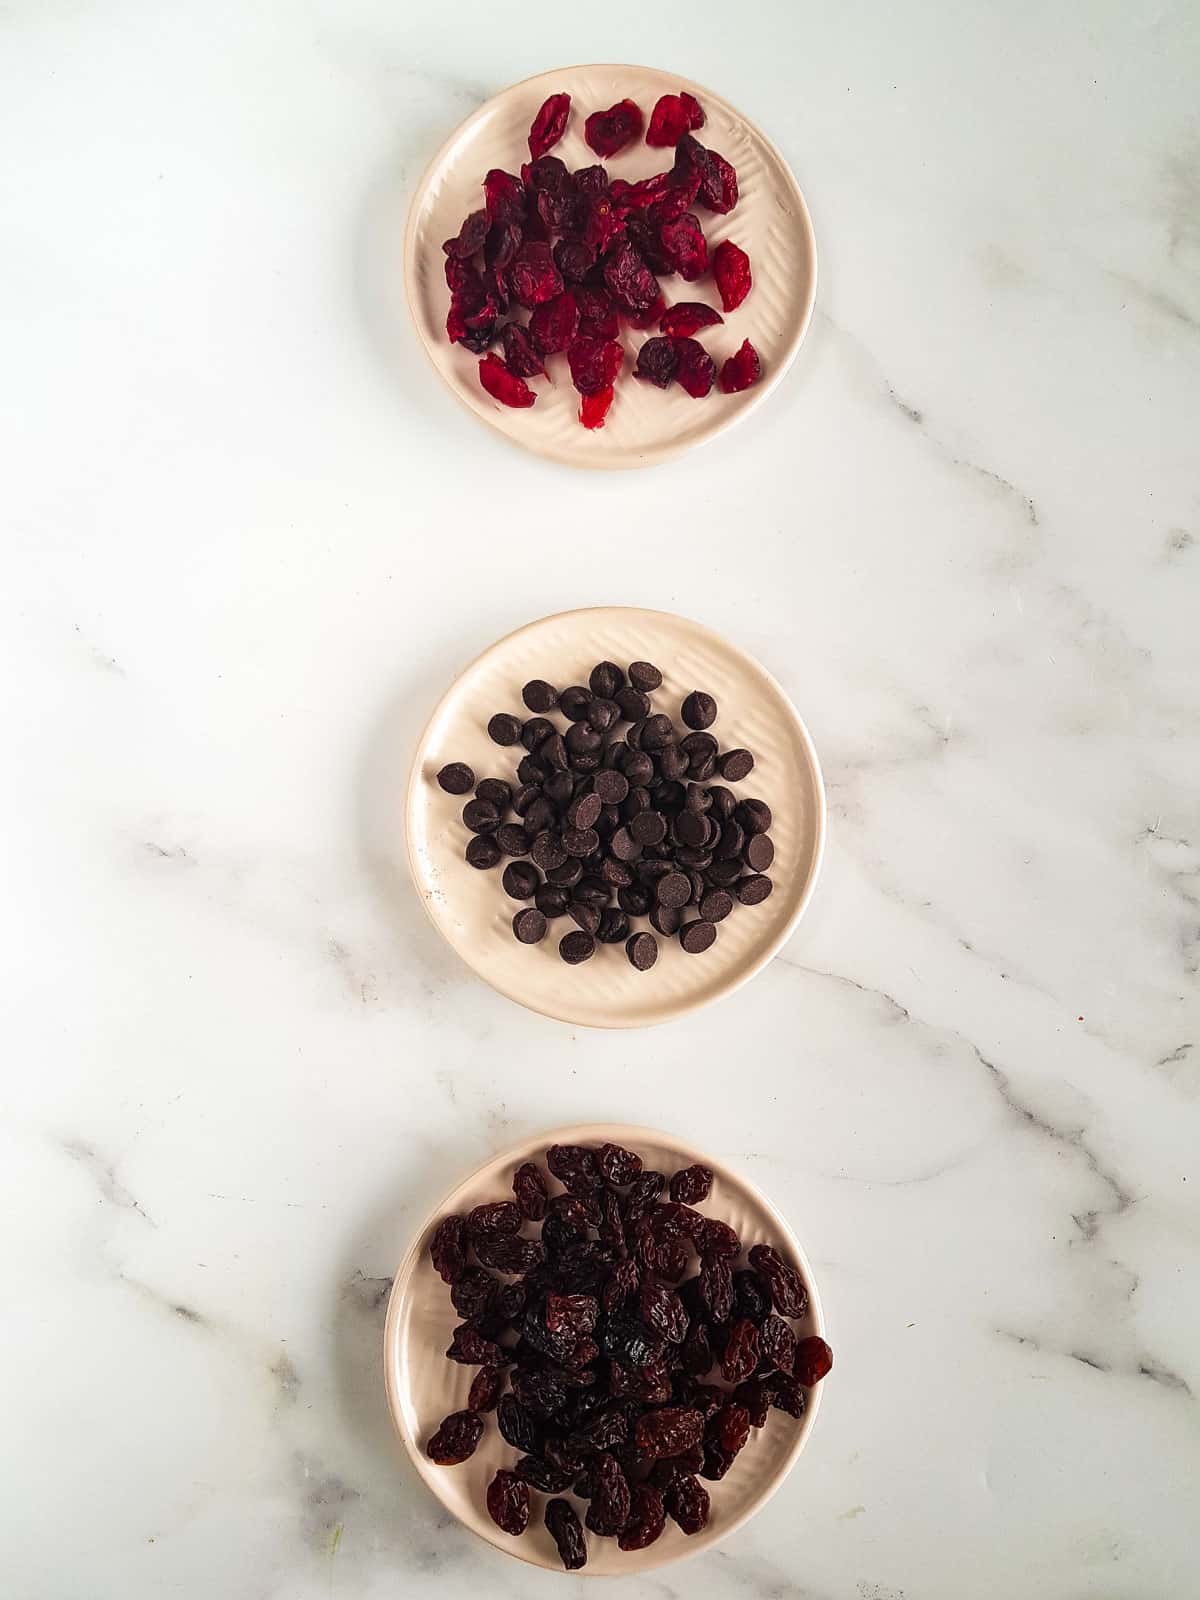 Bowls of cranberries, chocolate chips and raisins.